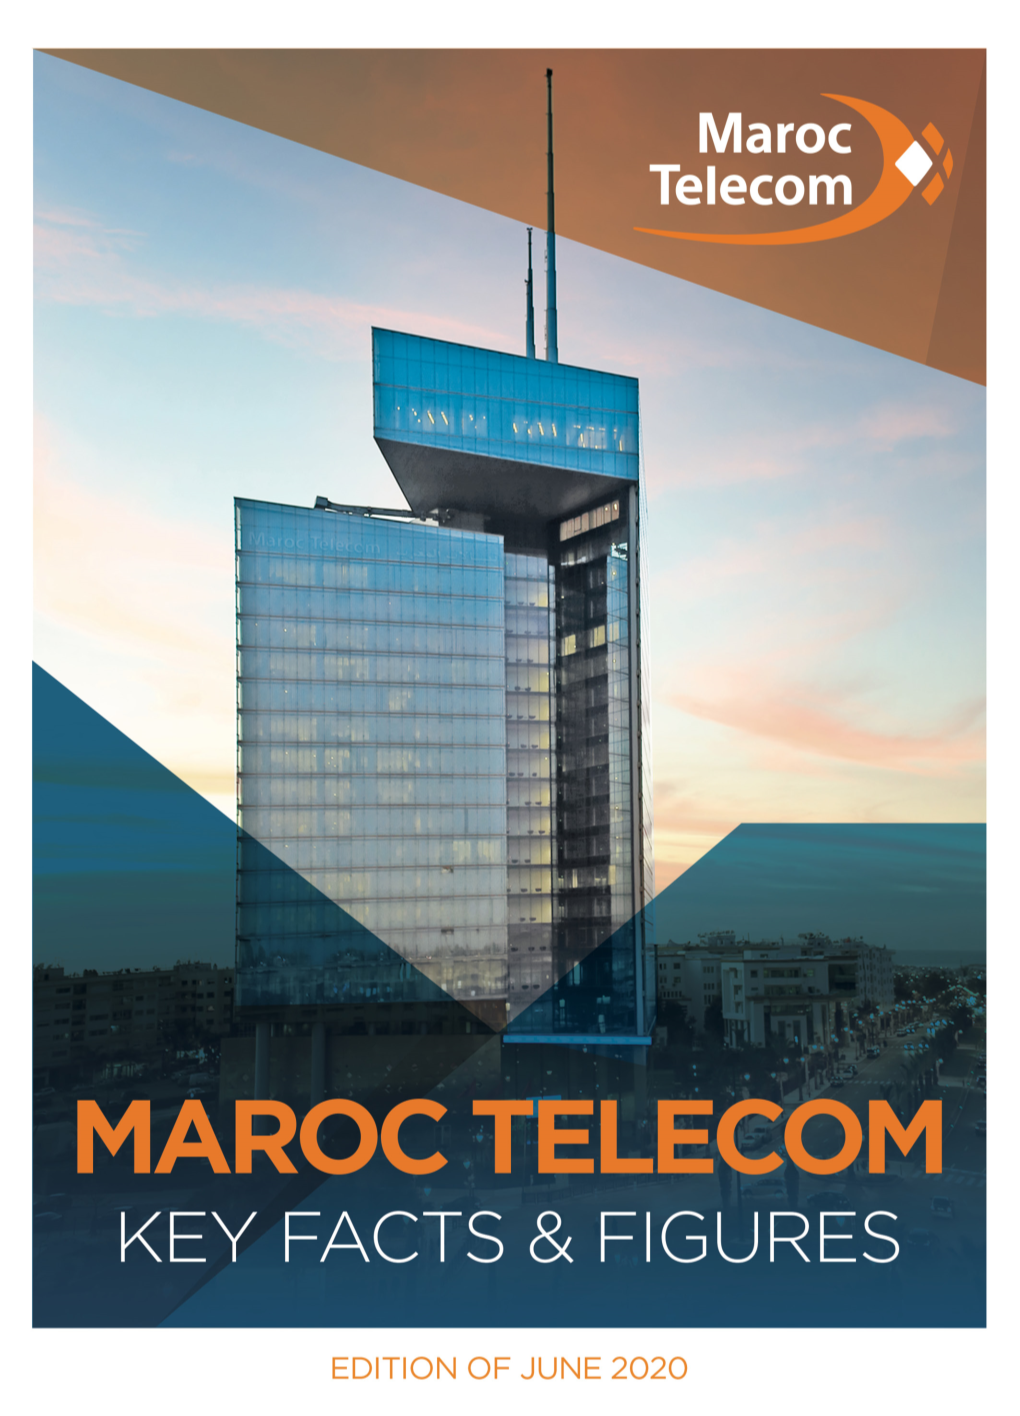 MAROC TELECOM GROUP a Significant Force in the Economic and Social Development in 11 African Countries